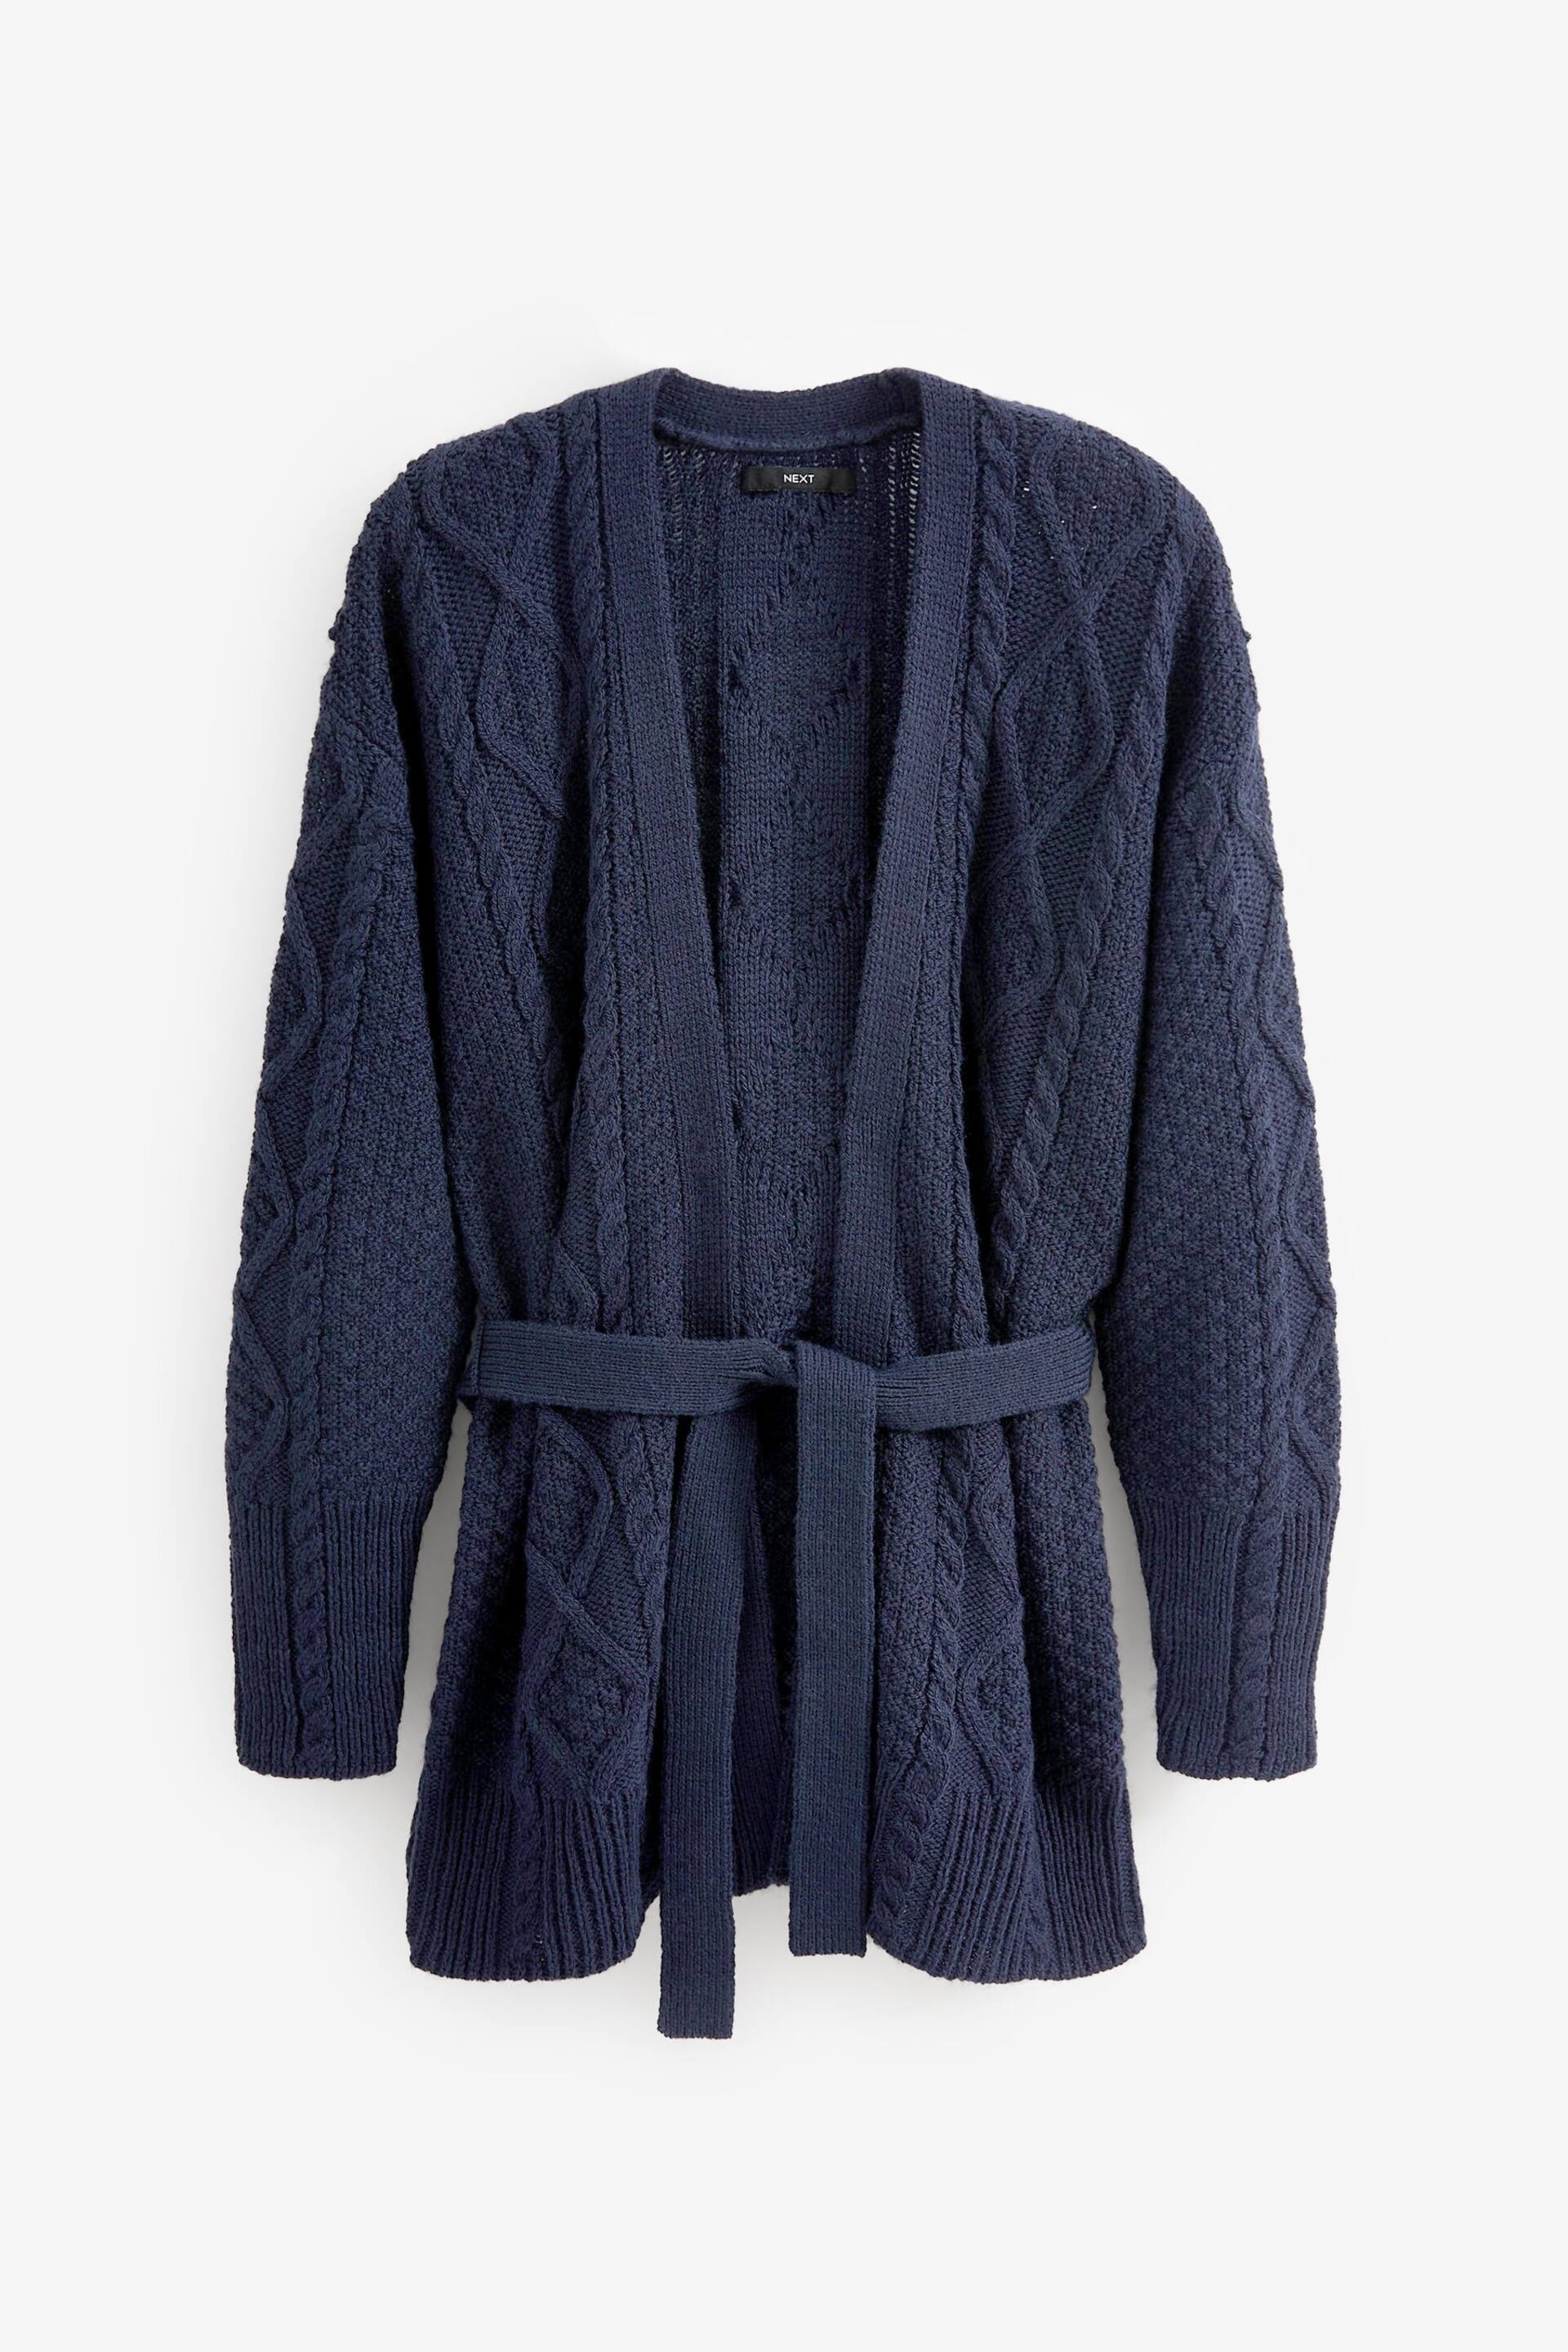 Navy Blue Cable Belt Cardigan - Image 6 of 7